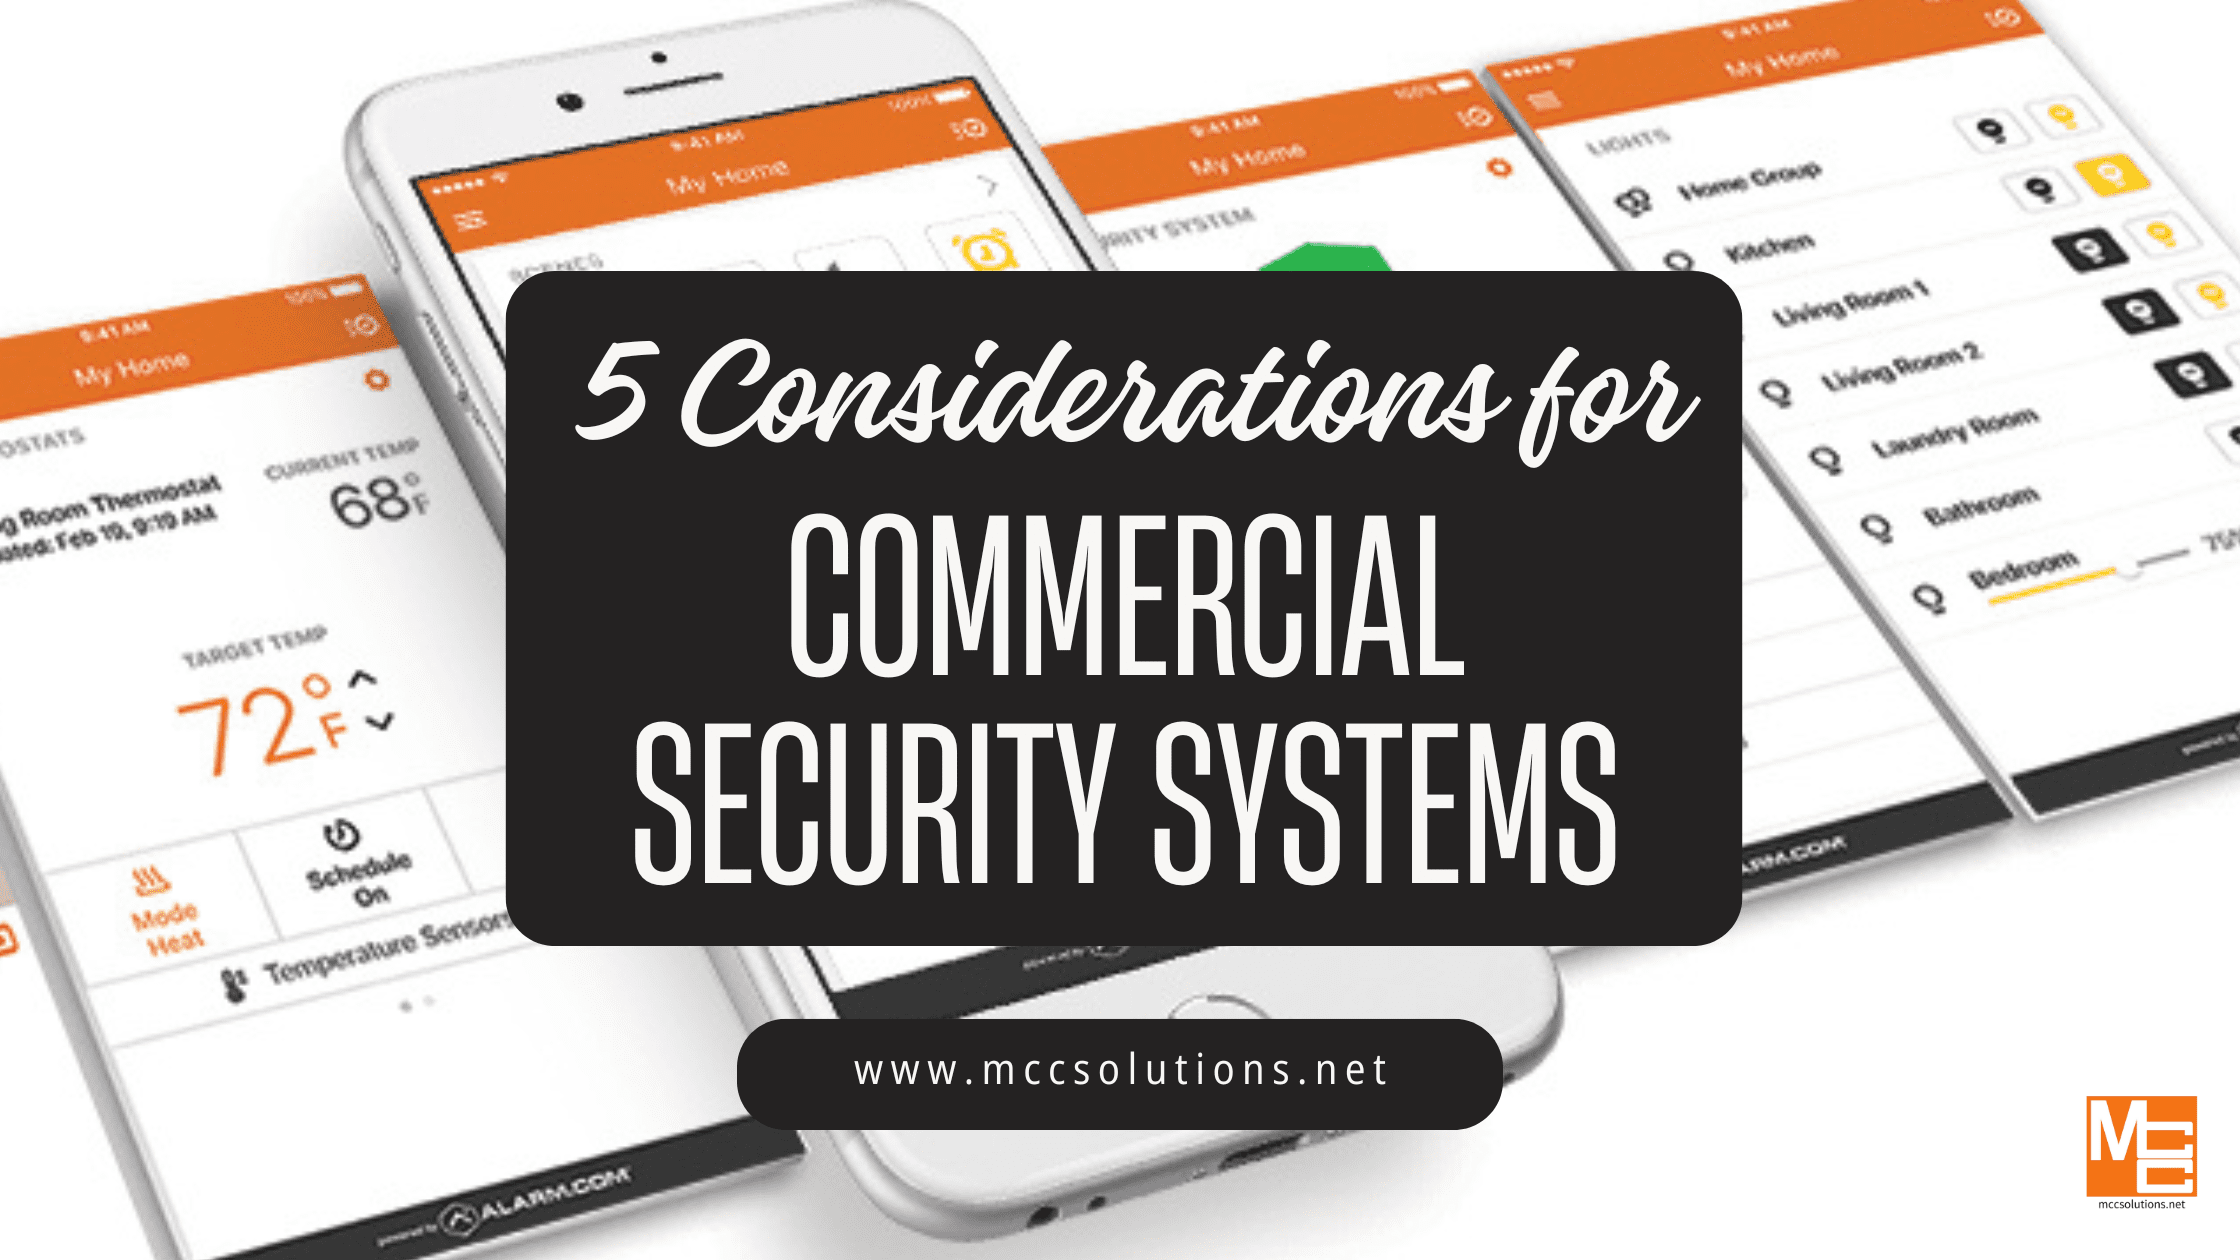 5 Key Considerations for Commercial Security Systems